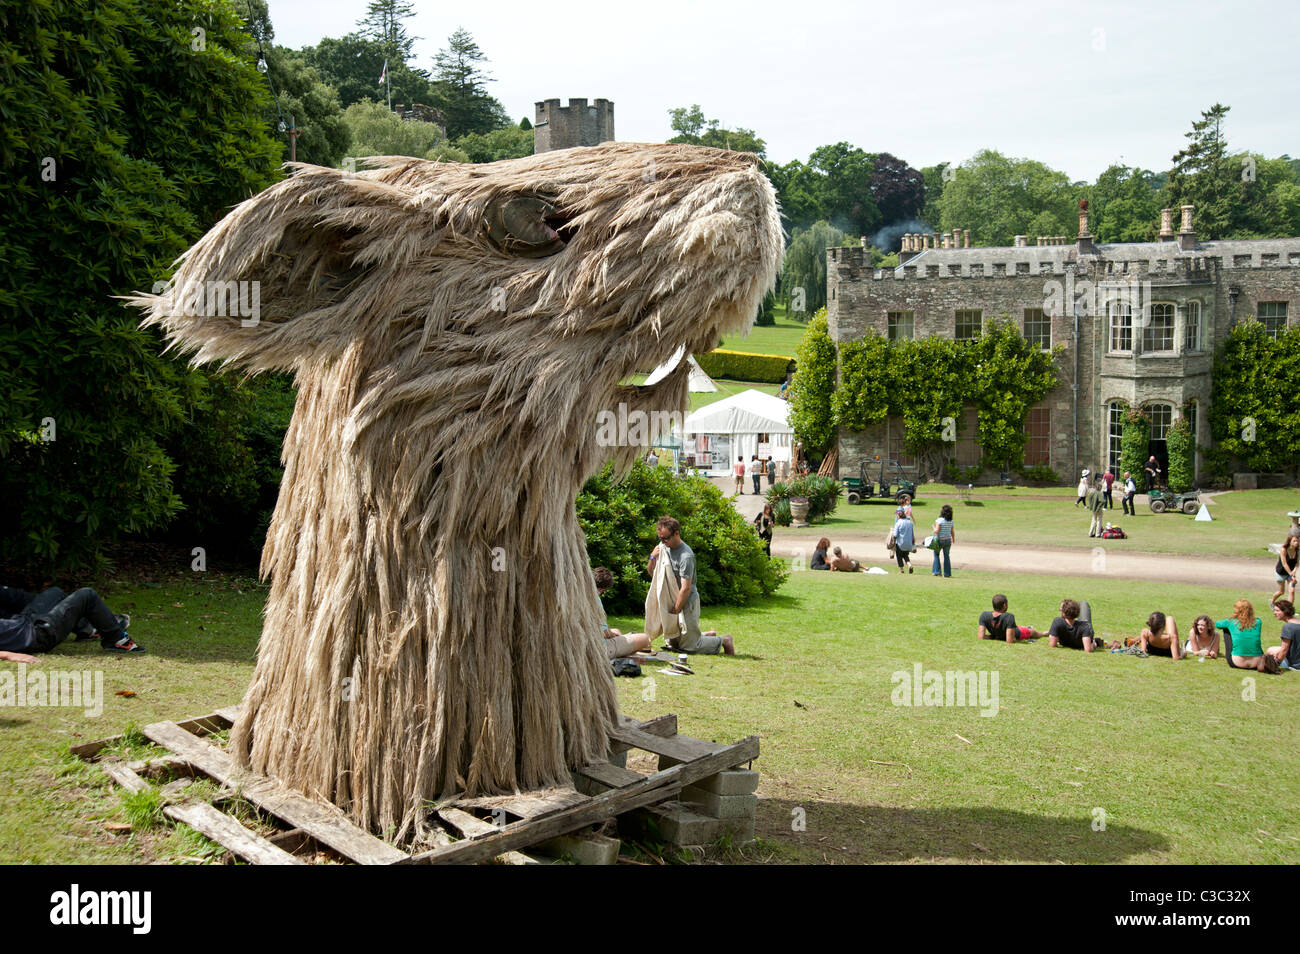 The Rodent head at the Port Eliot Literary Festival St Germans Cornwall UK Stock Photo